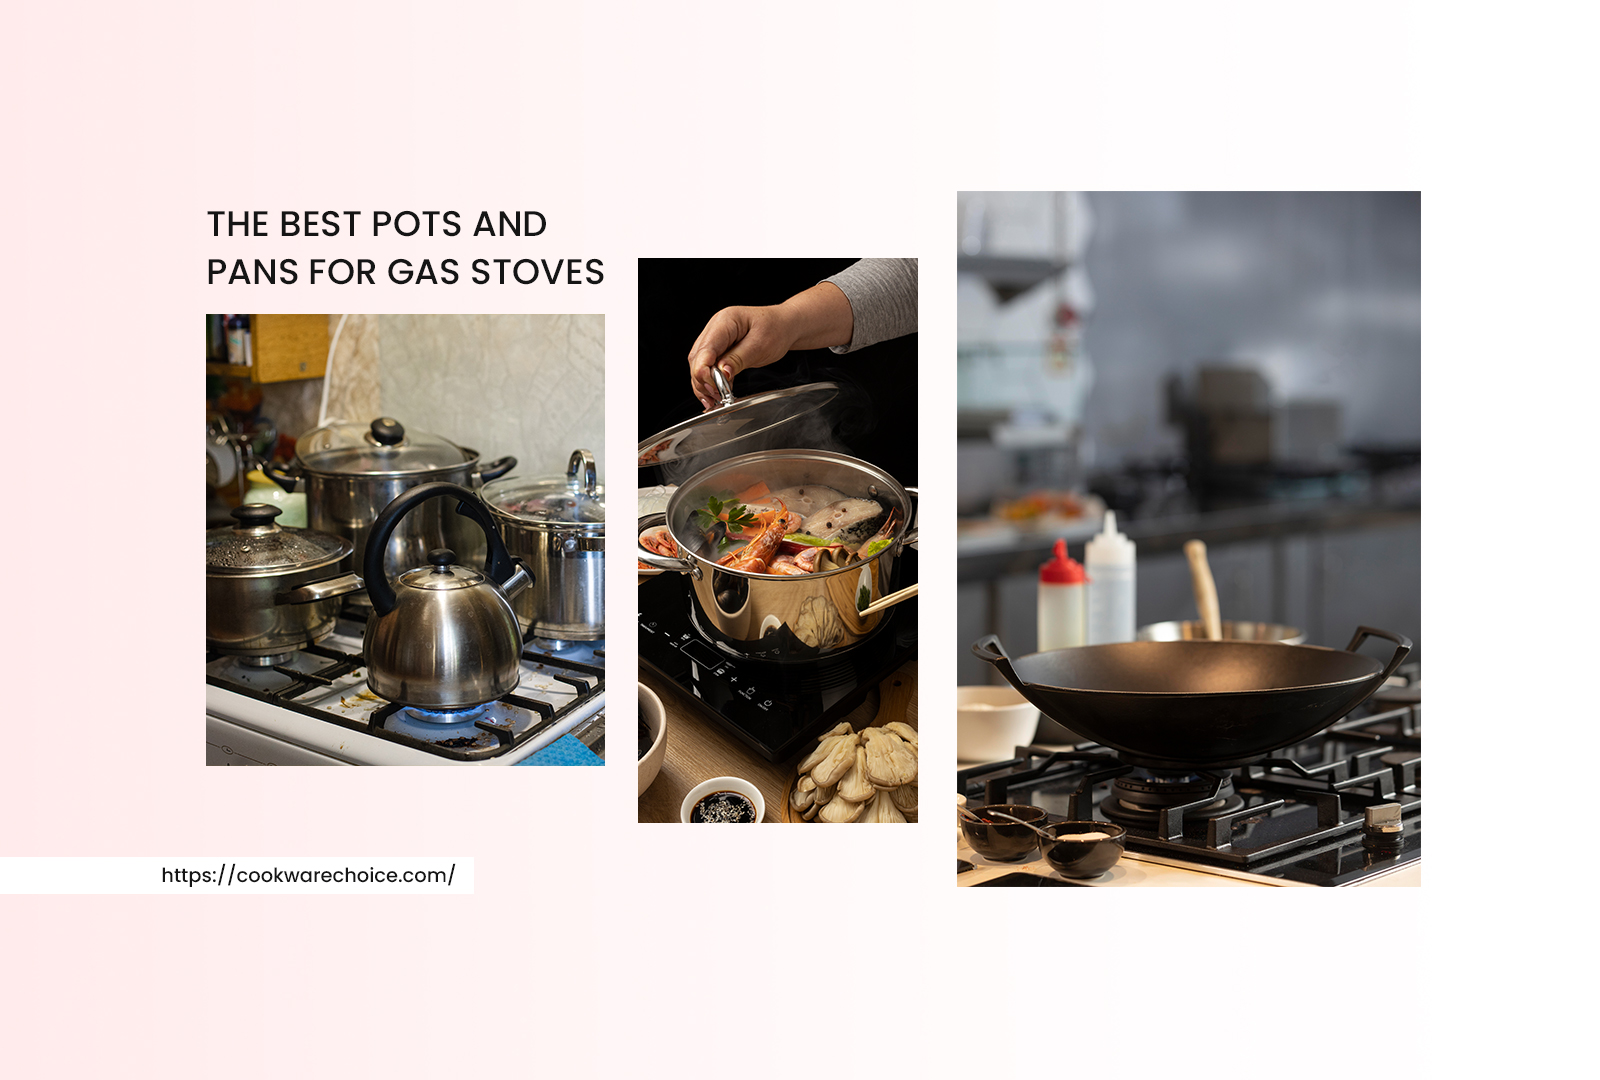 Best Pots And Pans for Gas Stove